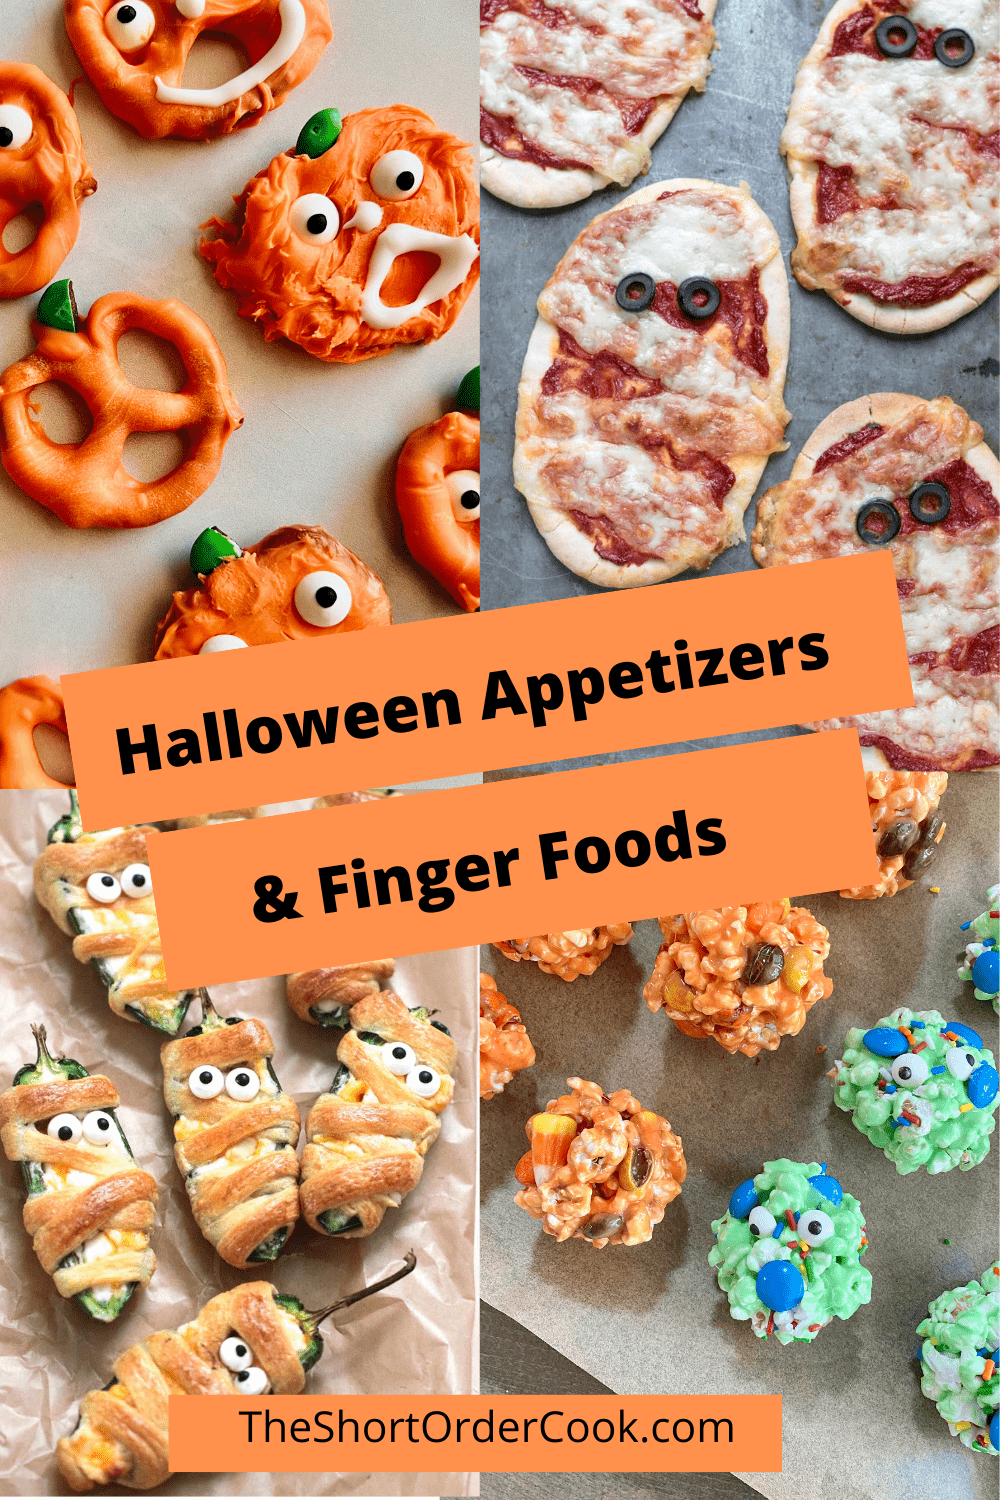 4 different recipes for mummy and pumpkin shaped foods.